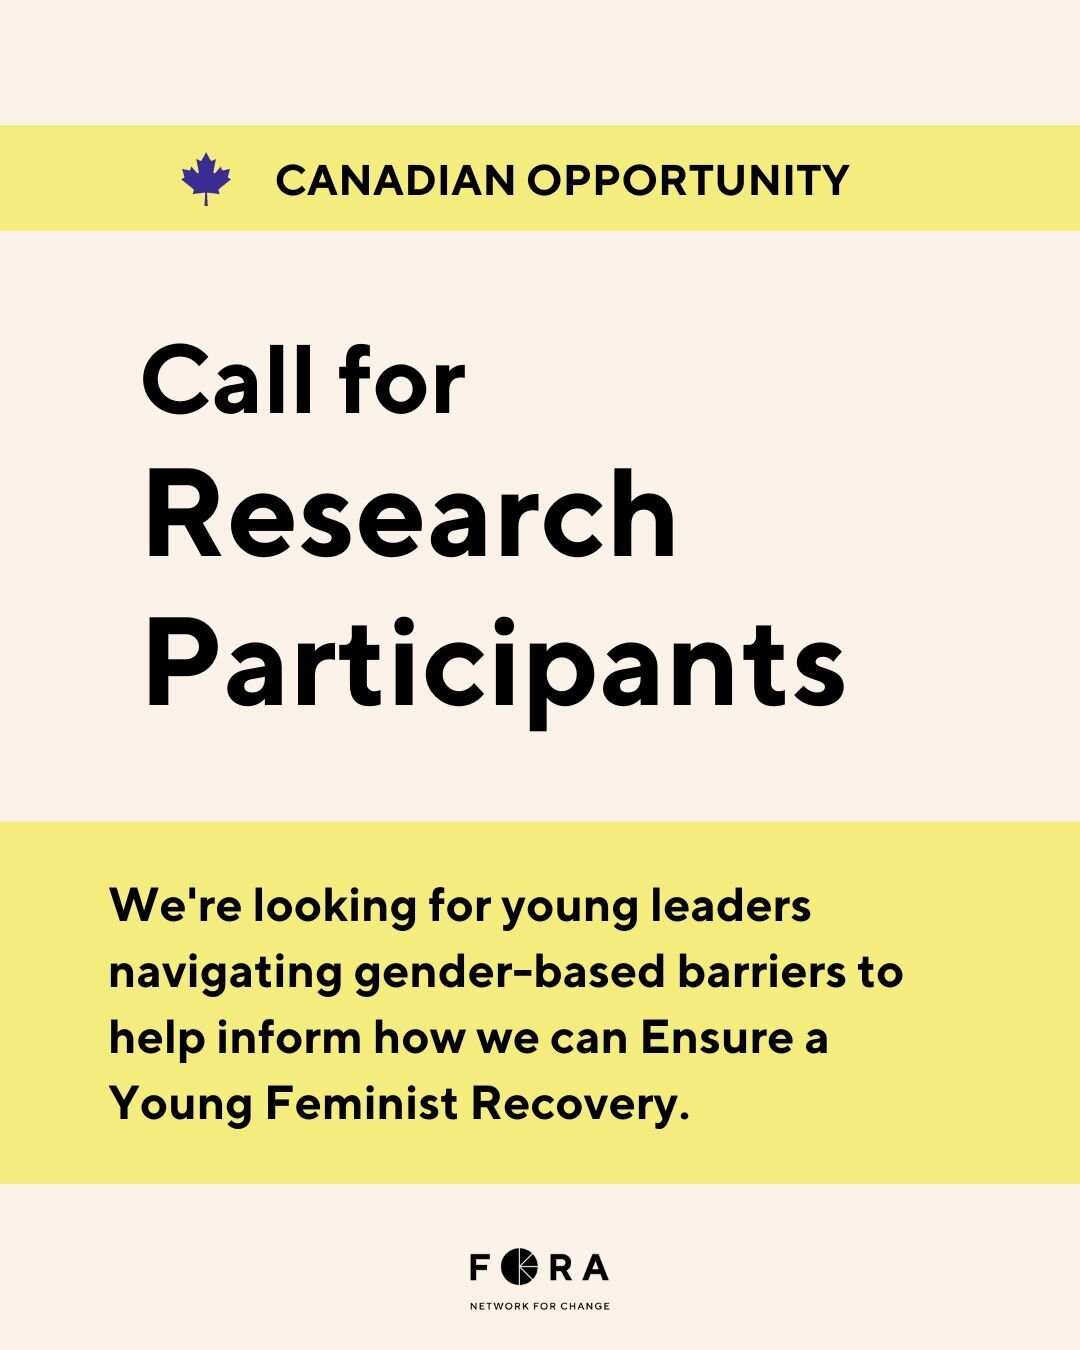 As part of an ongoing research project, Fora wants to hear from for young leaders navigating gender-based barriers, to learn how we can Ensure a Young Feminist Recovery. 

If you are...
➡️ between the ages of 18 to 30
➡️ living in Canada
➡️ navigatin